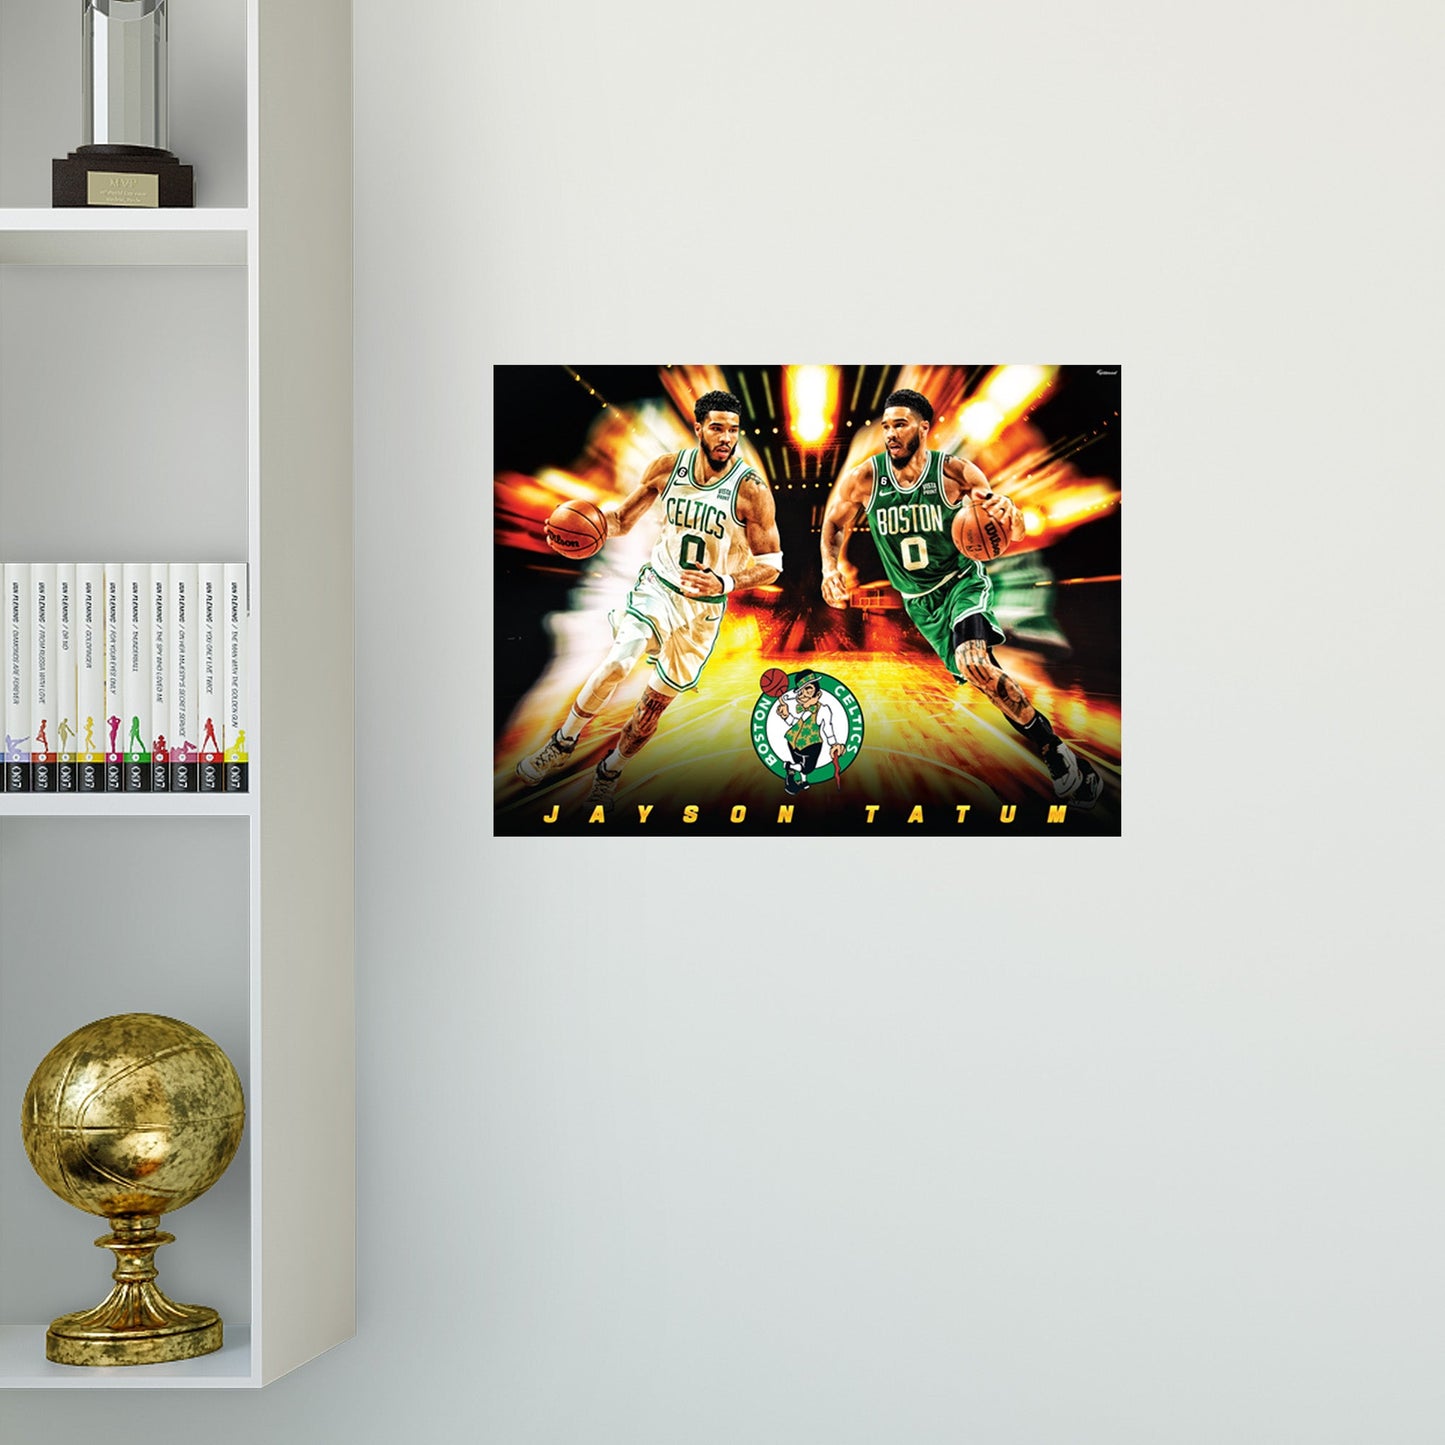 Boston Celtics: Jayson Tatum Icon Poster - Officially Licensed NBA Removable Adhesive Decal